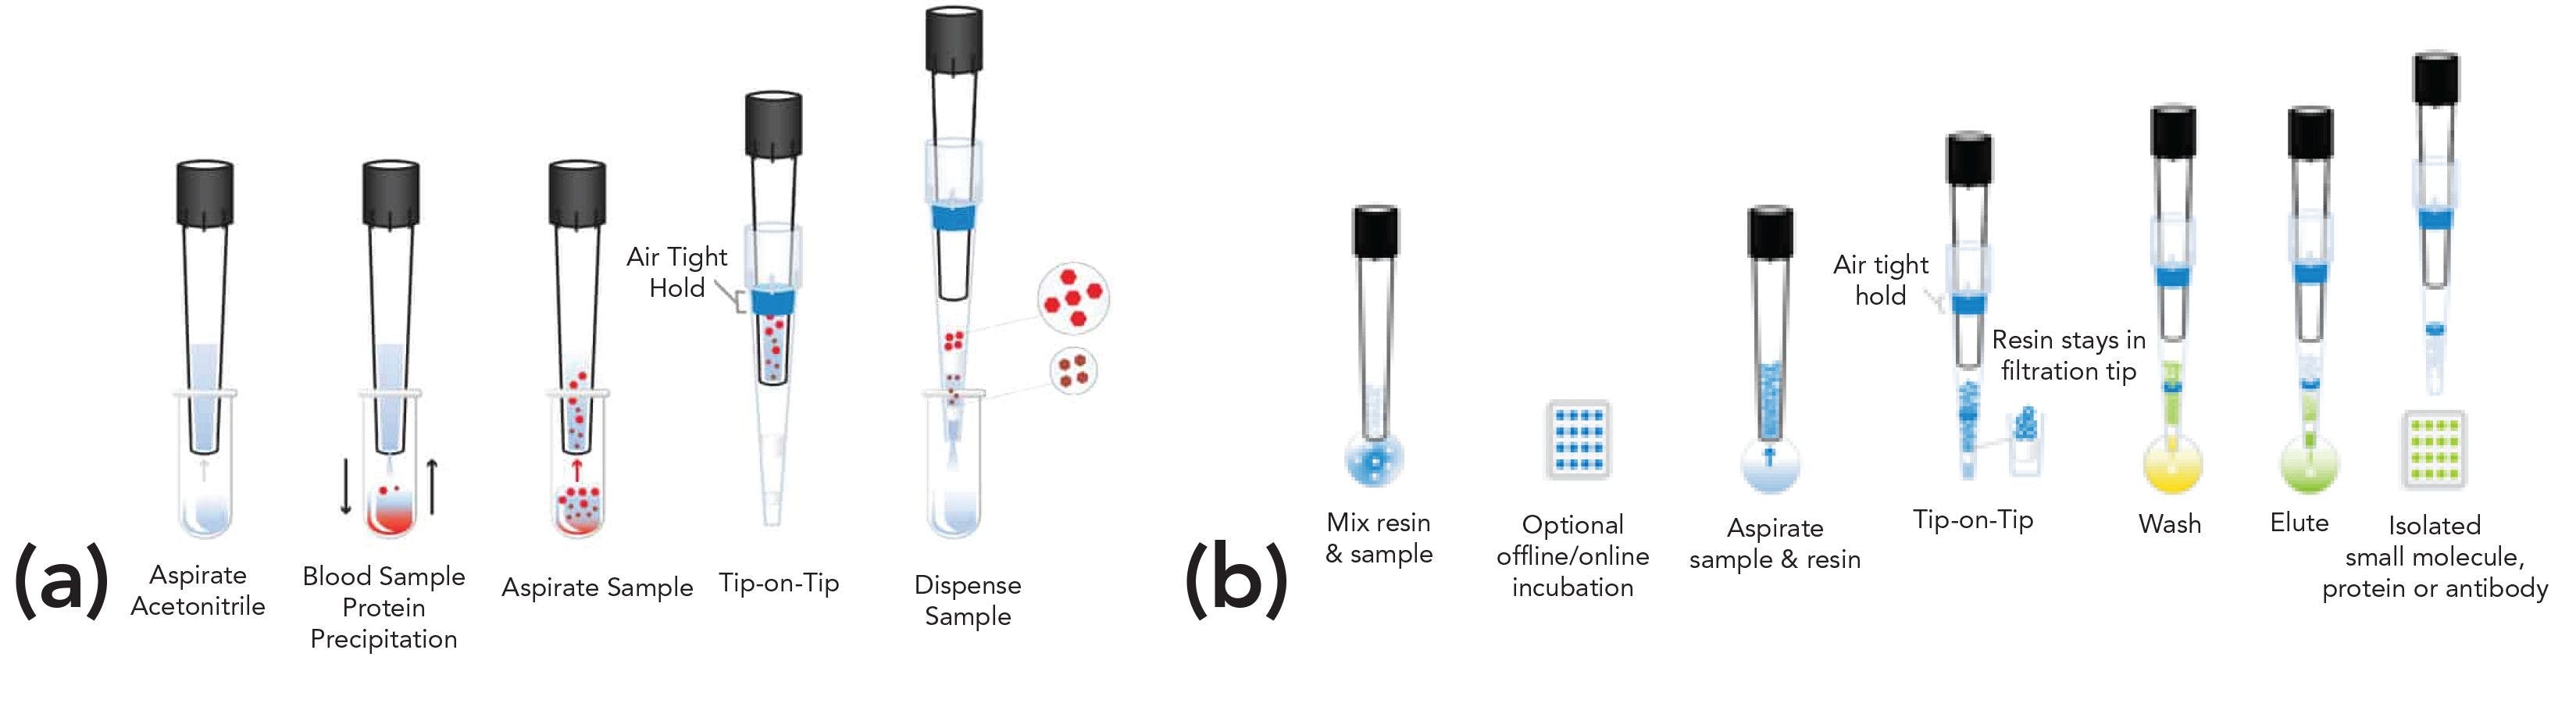 FIGURE 1: DPX Technologies Tip-on-Tip technology. (a) Protein precipitation with the DPX Technologies INTip filtration, demonstrating removal of blood proteins with acetonitrile aspiration. (b) The generalized schematic of the SPE mode features the same steps as in conventional SPE.